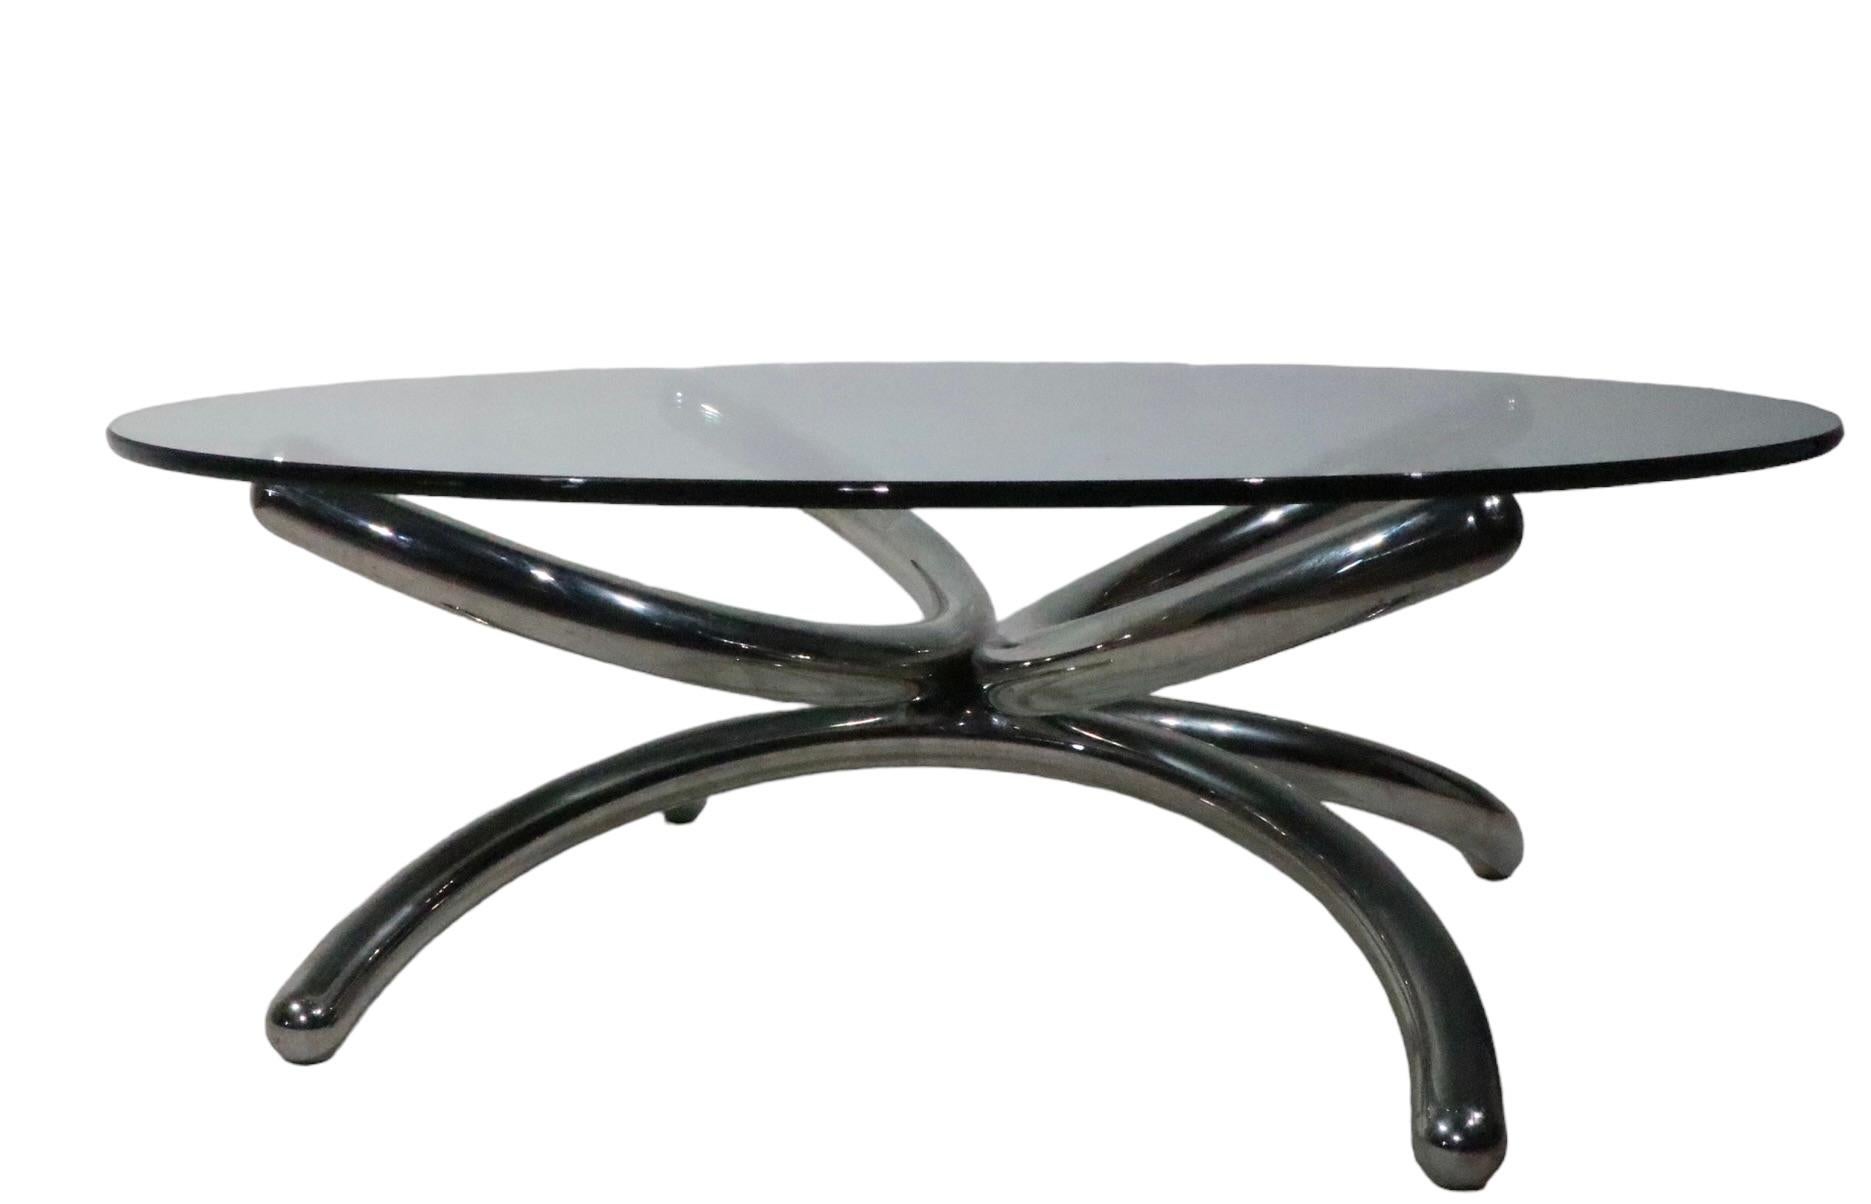  Round Chrome and Glass Coffee Cocktail Table c 1960/70s possibly Paul Tuttle  For Sale 12